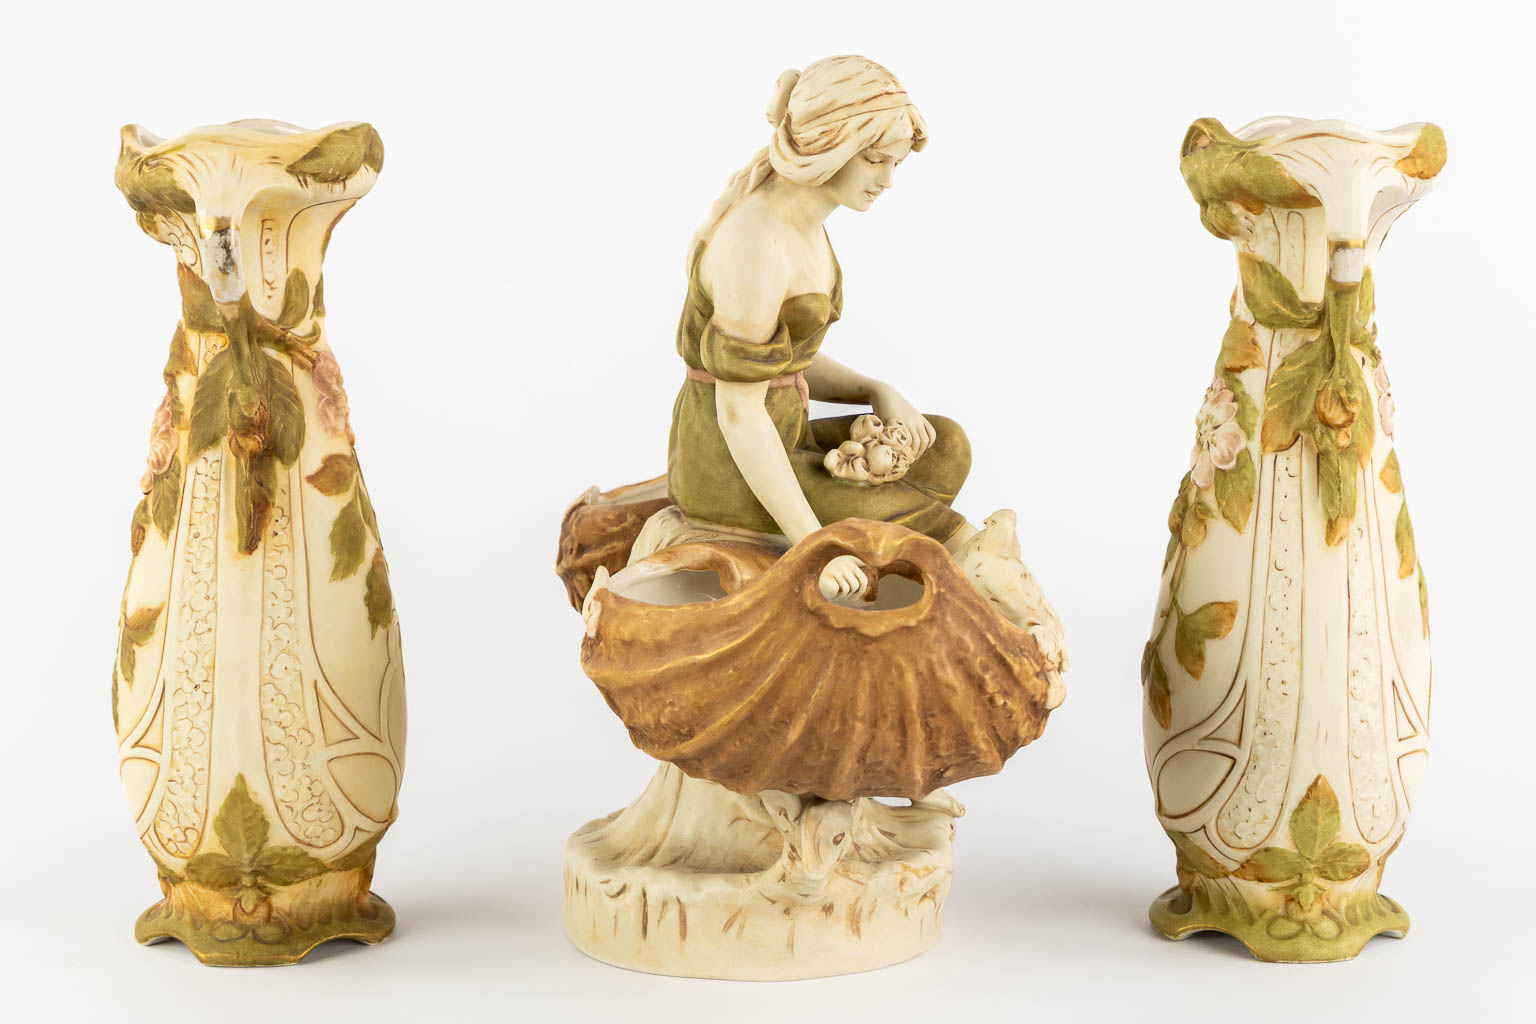 Royal Dux, a pair of vases and a lady with two baskets. Polychrome porcelain. (L:17 x W:36 x H:32 cm)